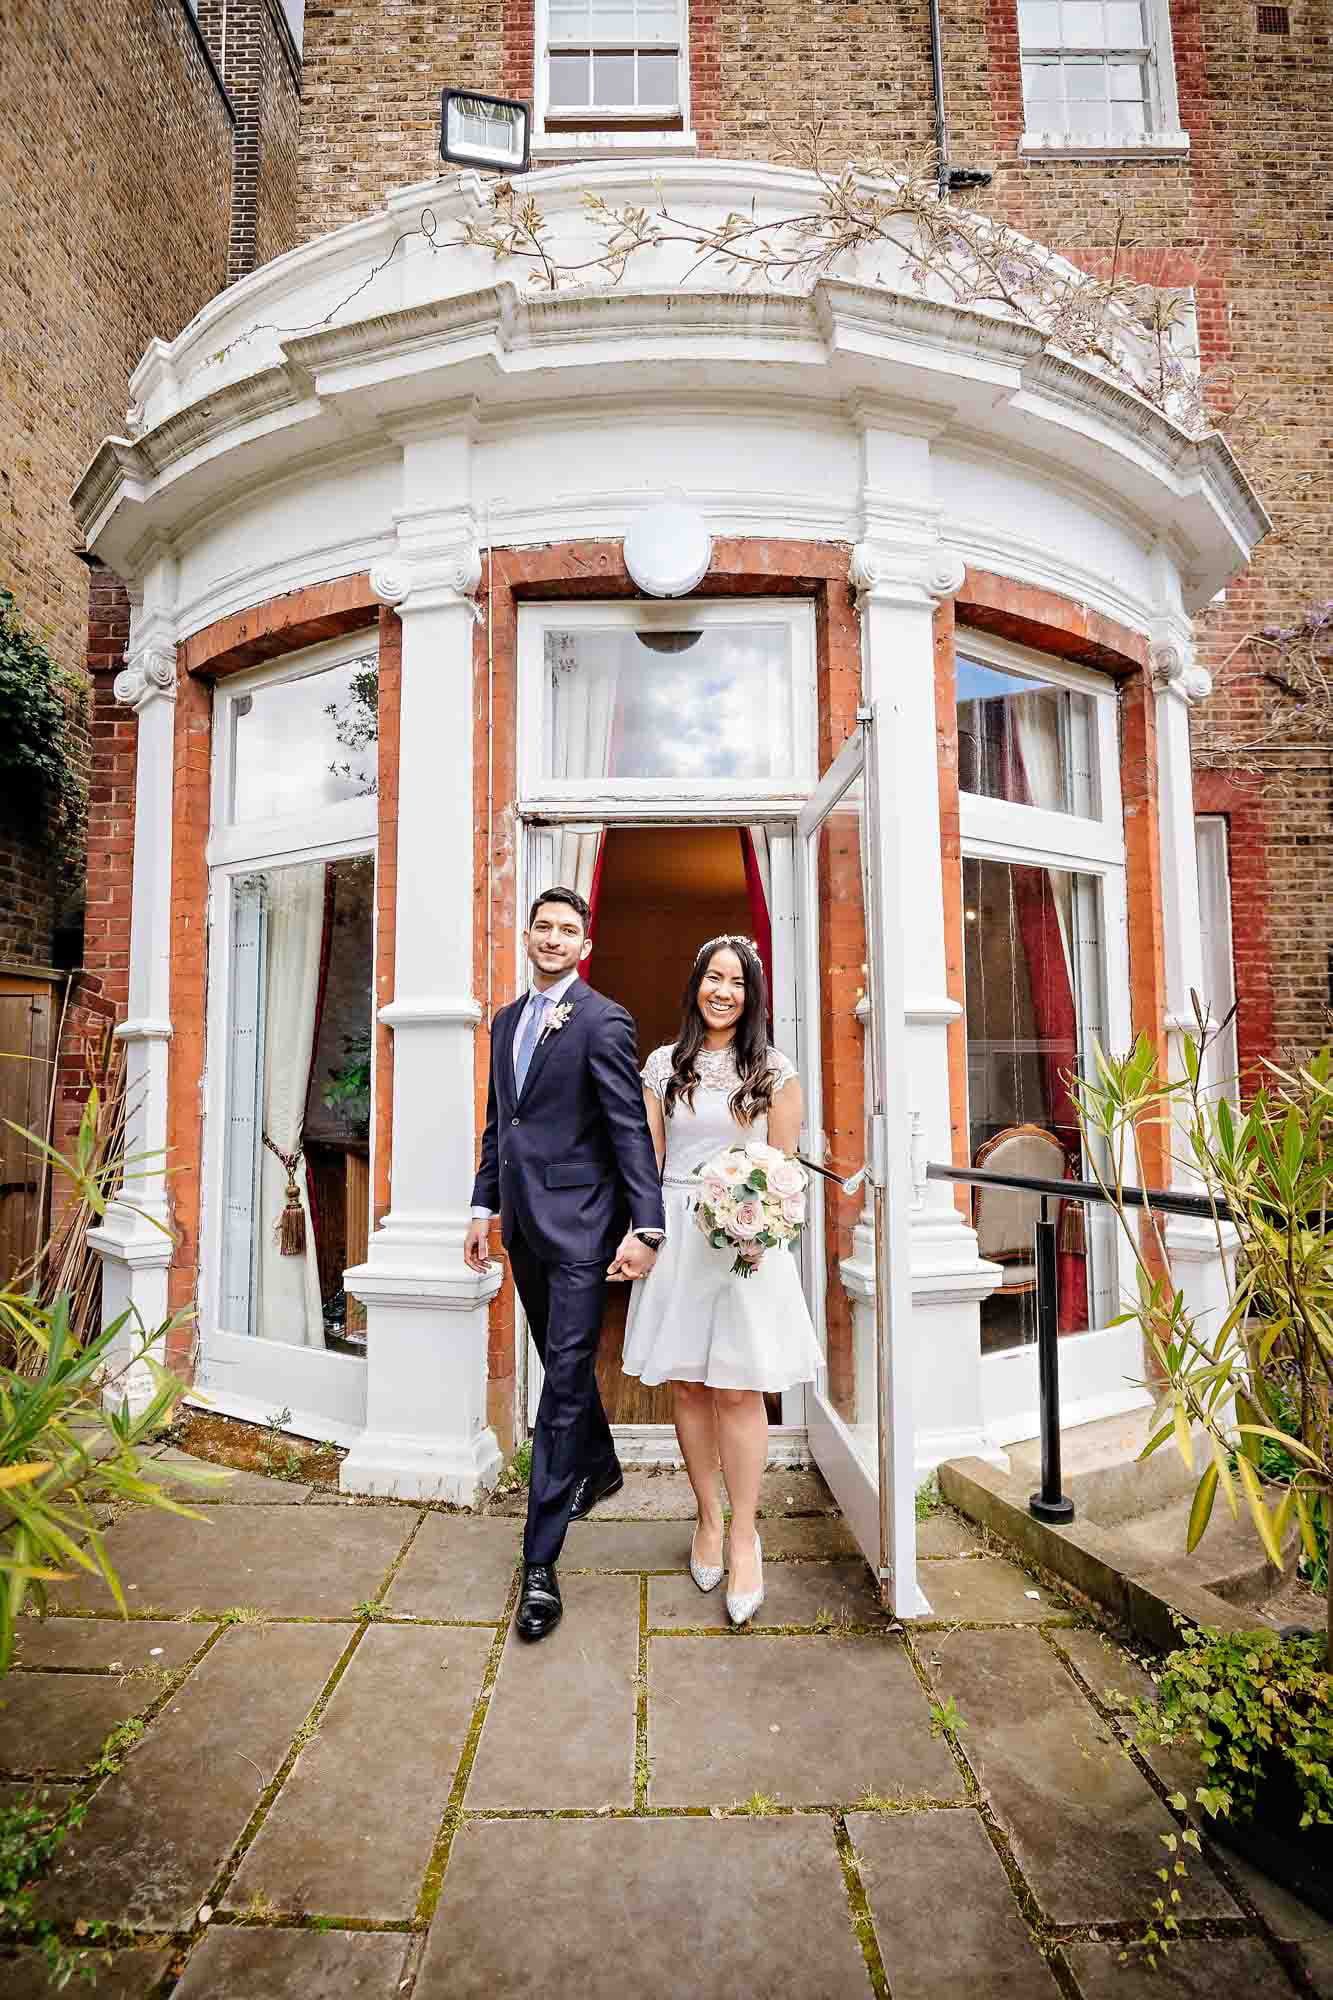 The couple leave Southwark's Garden Room through the French windows and enter the garden